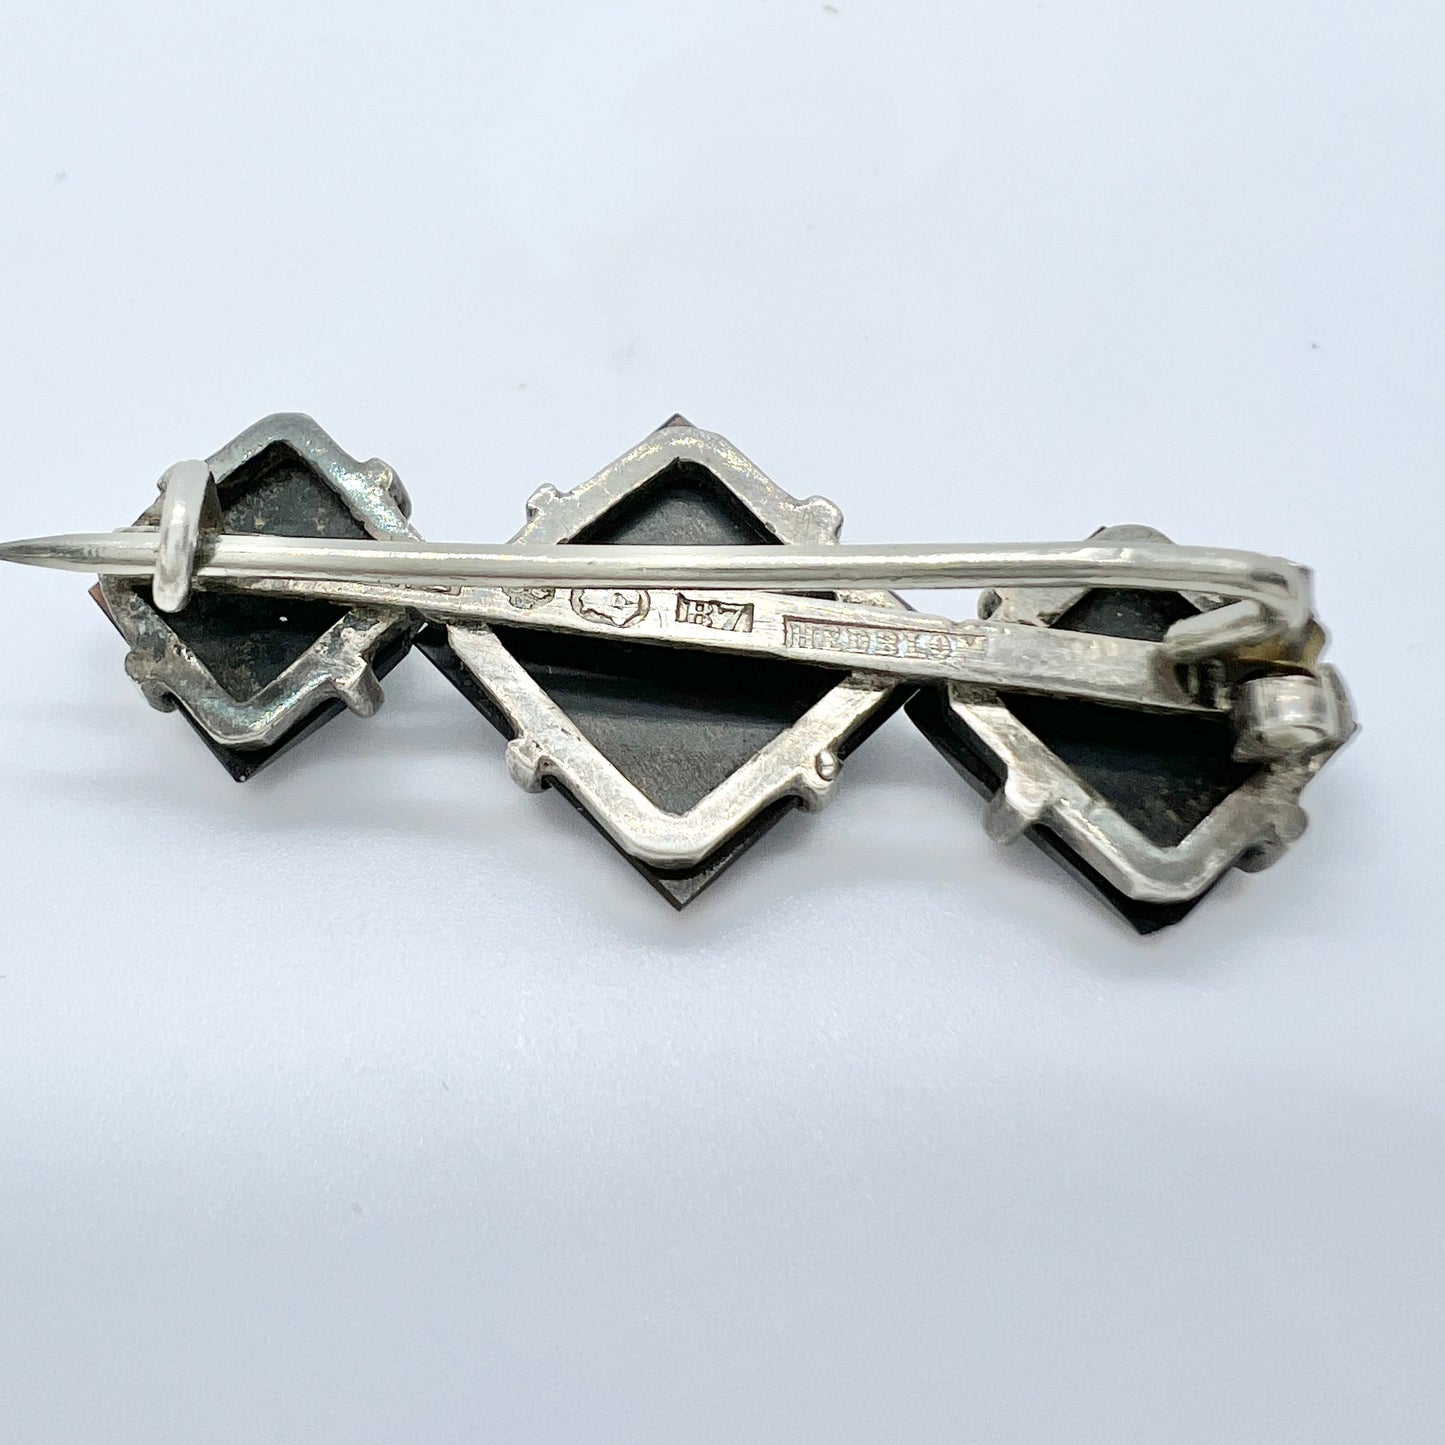 Hedblom, Sweden year 1904, Antique Solid Silver French Jet Mourning Brooch.